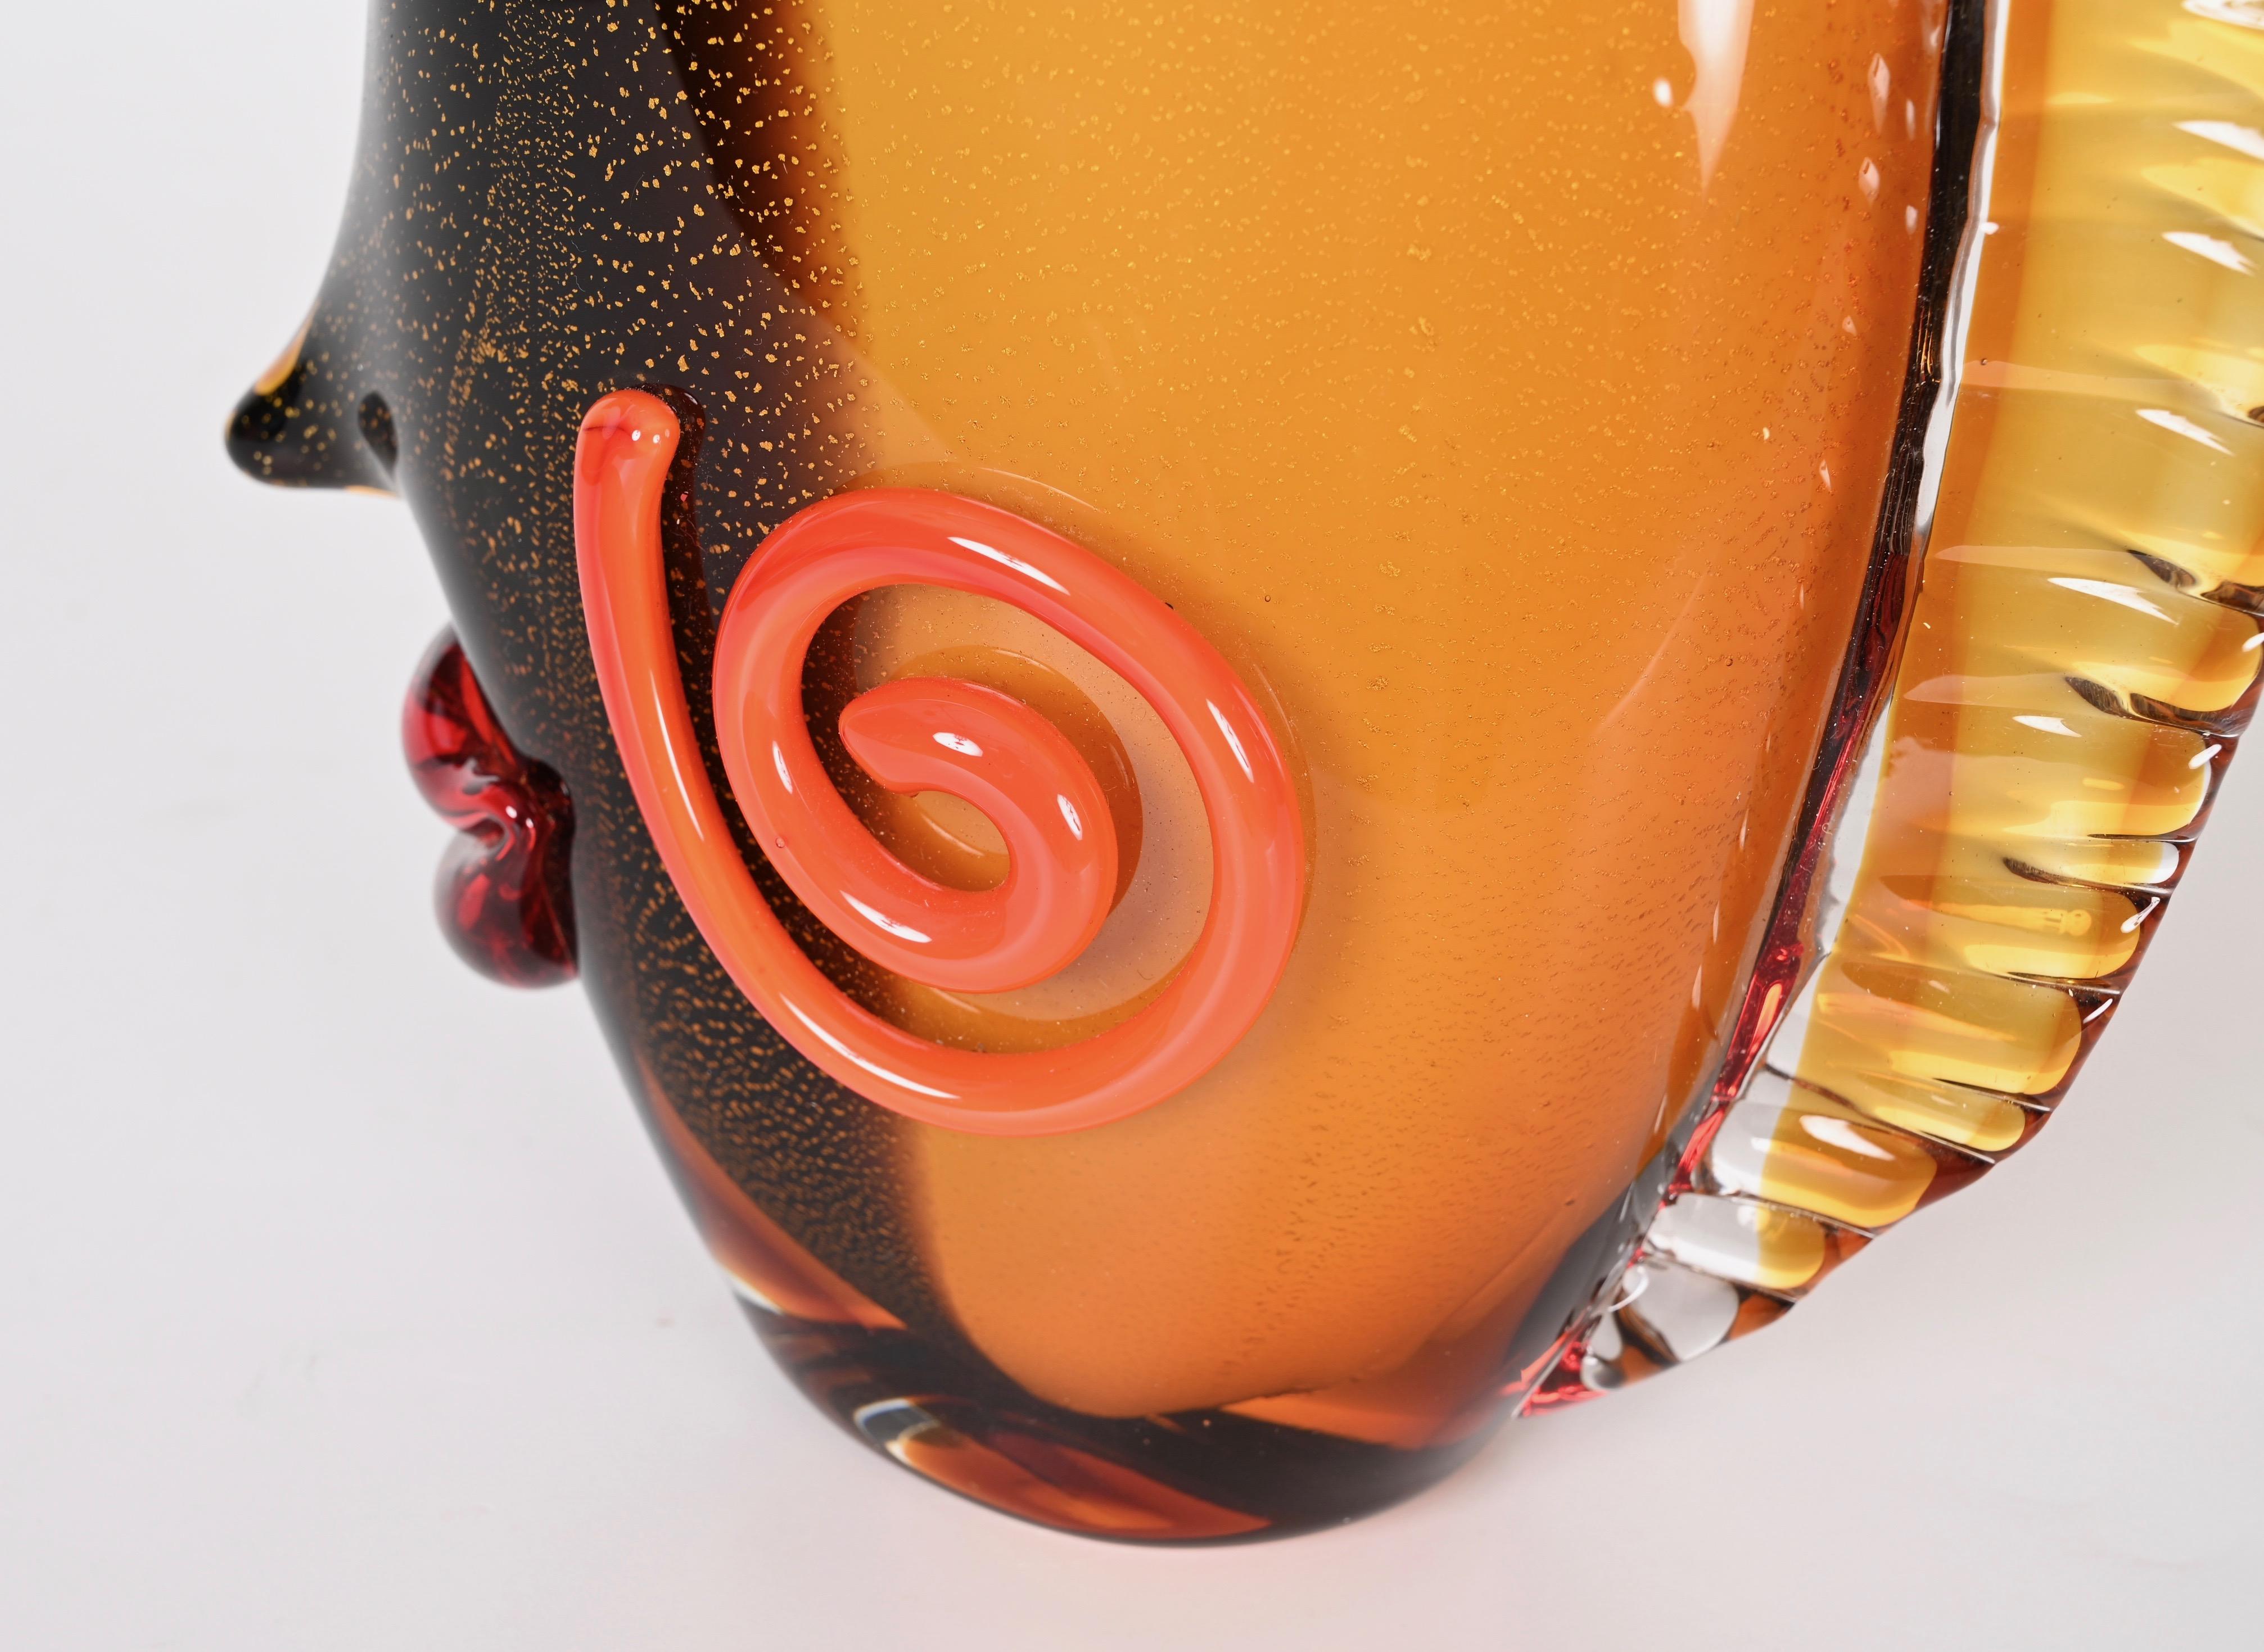 Mario Badioli after Picasso Black and Orange Sommerso Murano Glass Vase, 1980s For Sale 12